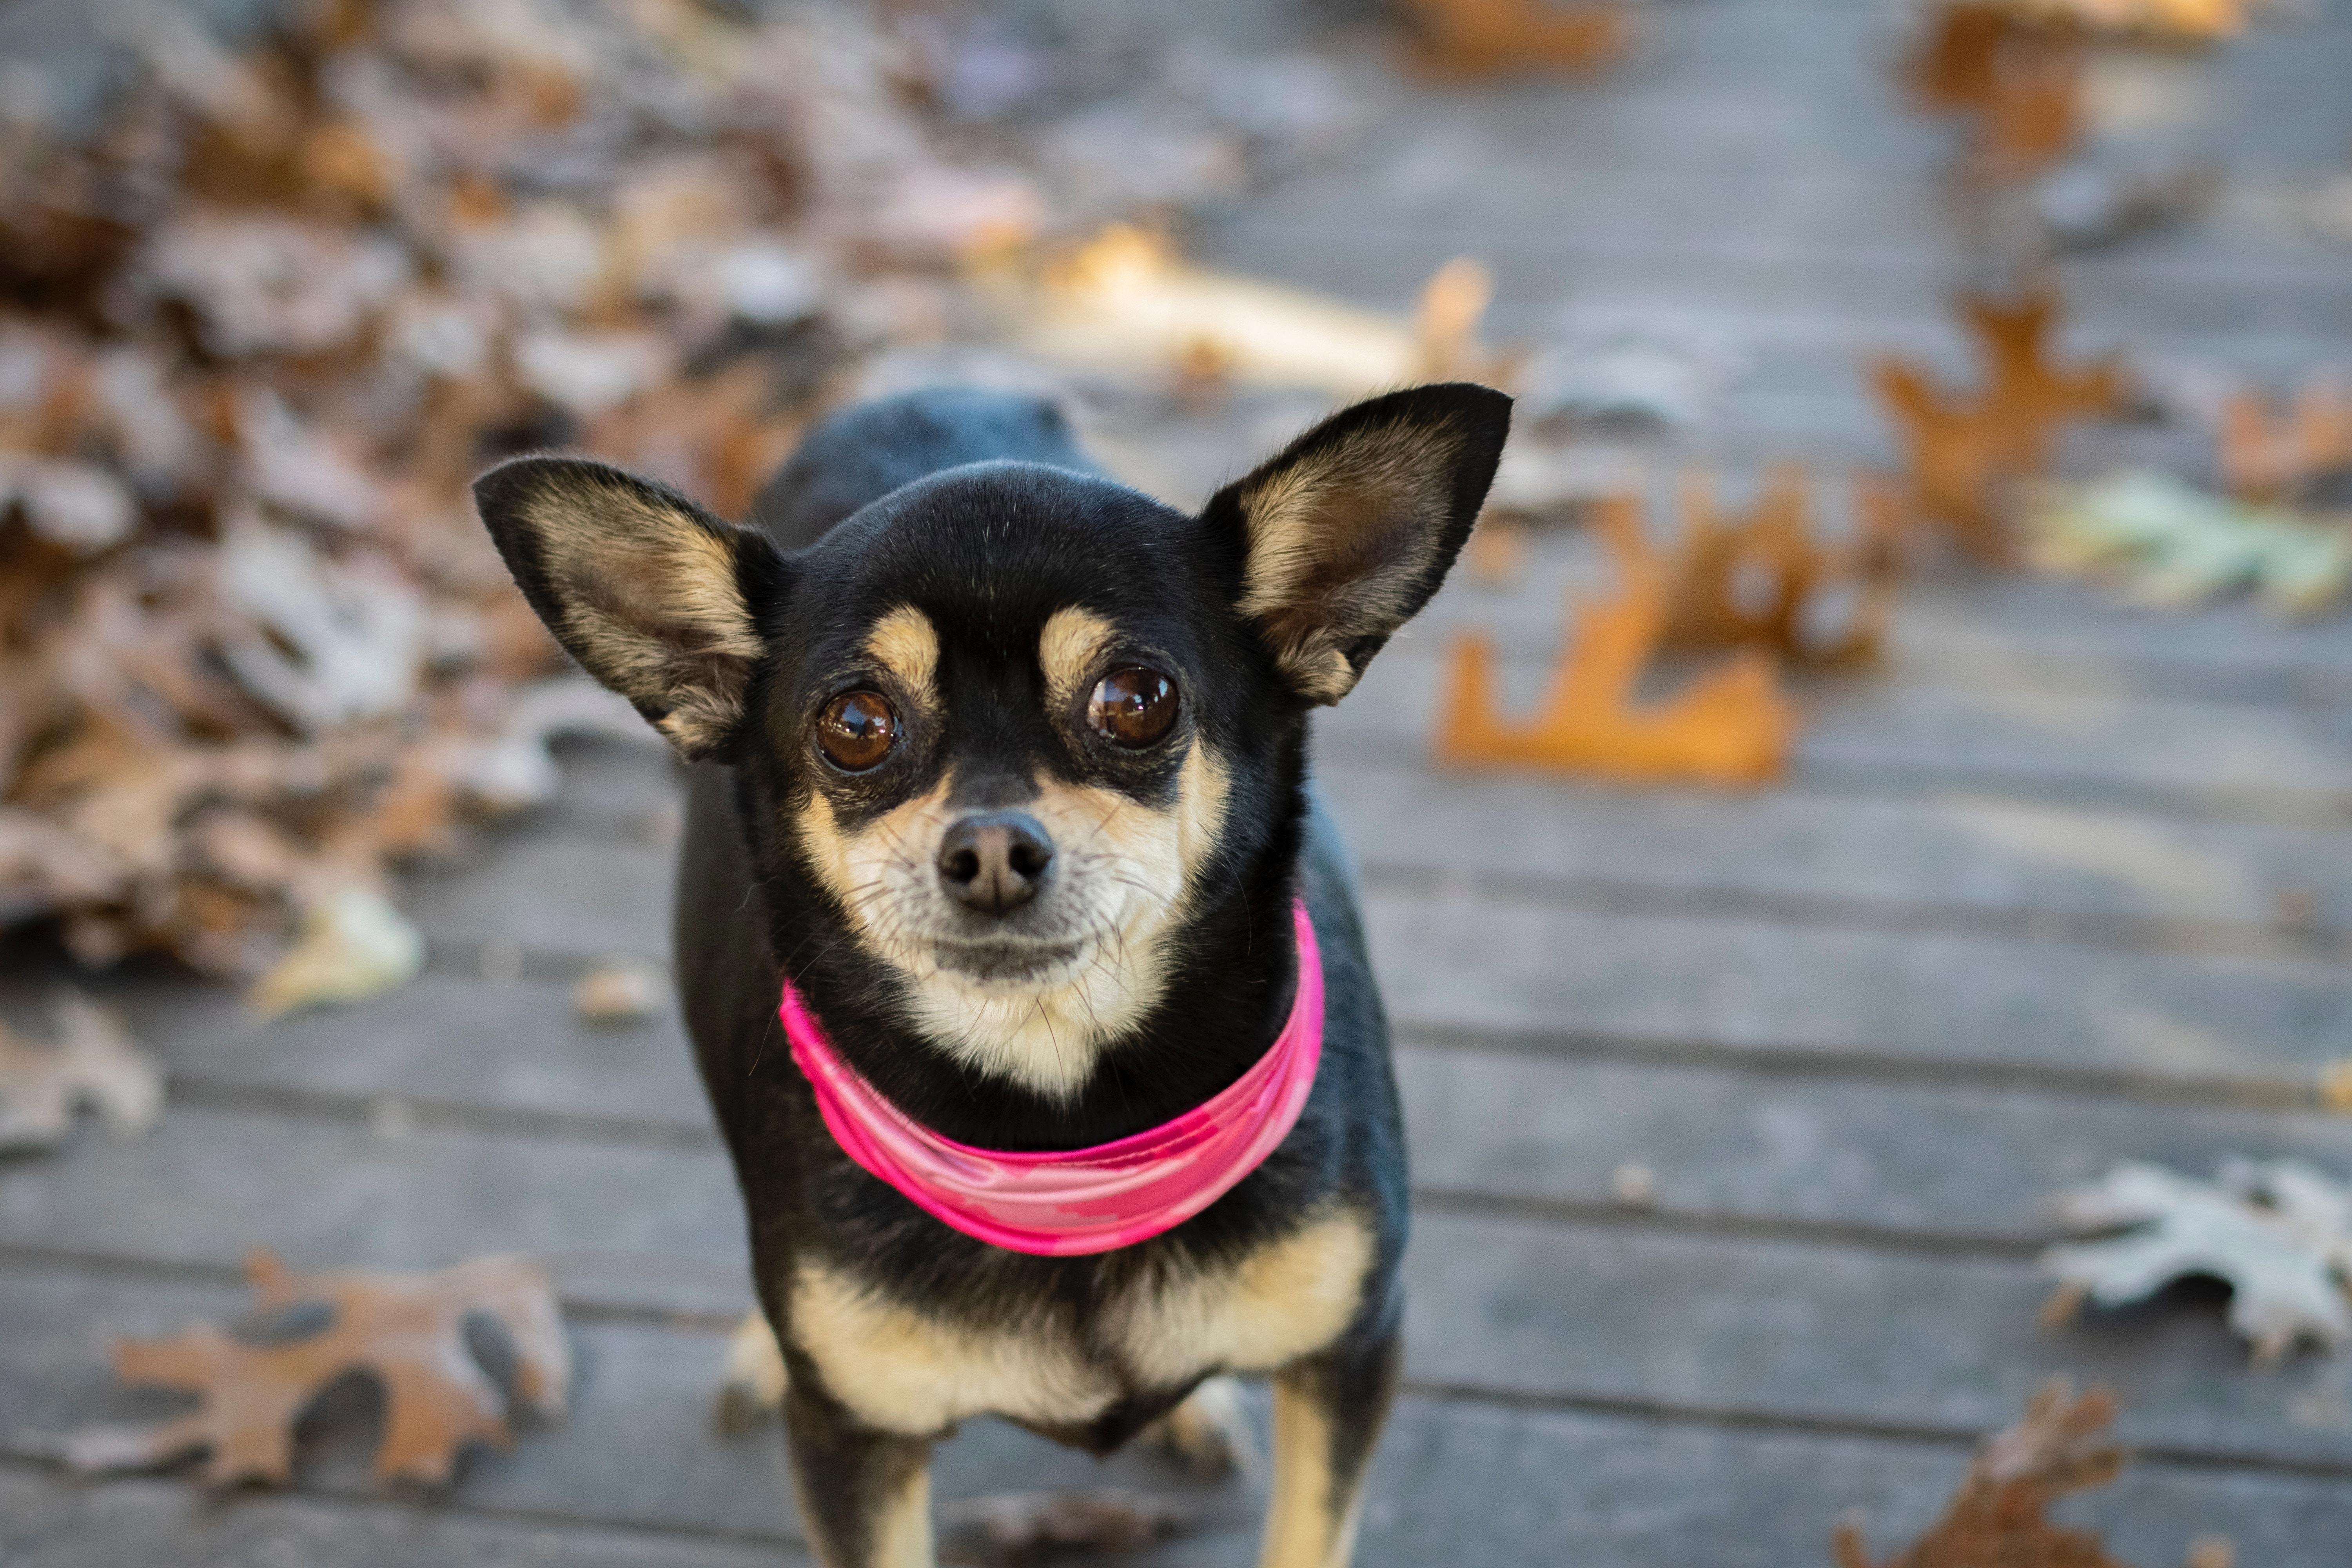 Popcorn for Pooch? Can Chihuahuas Enjoy This Snack Too?